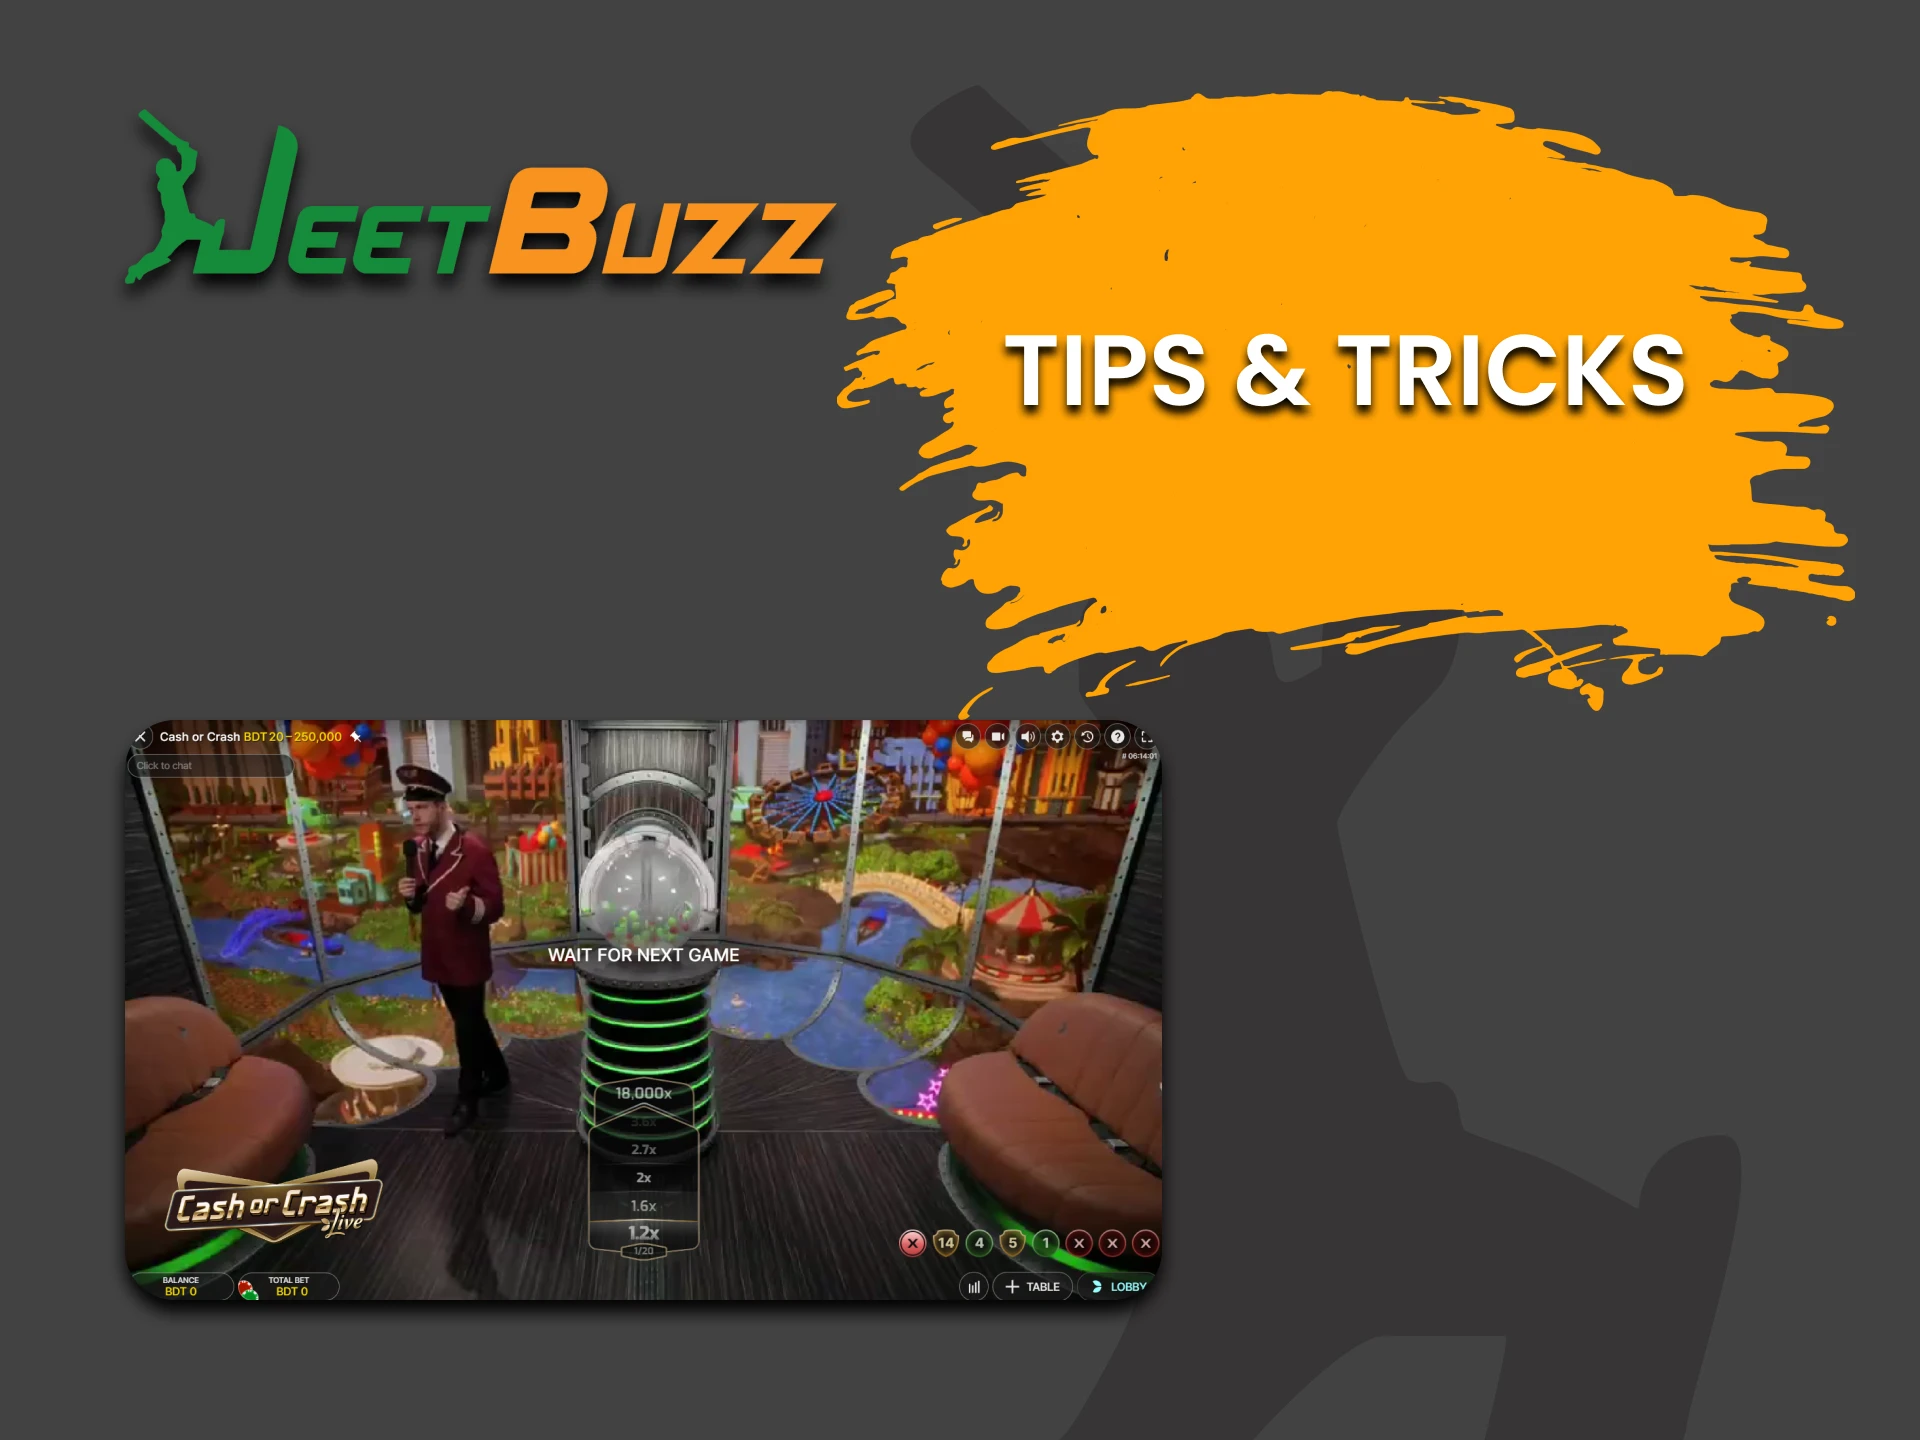 Learn tricks to win Game Show from Jeetbuzz.